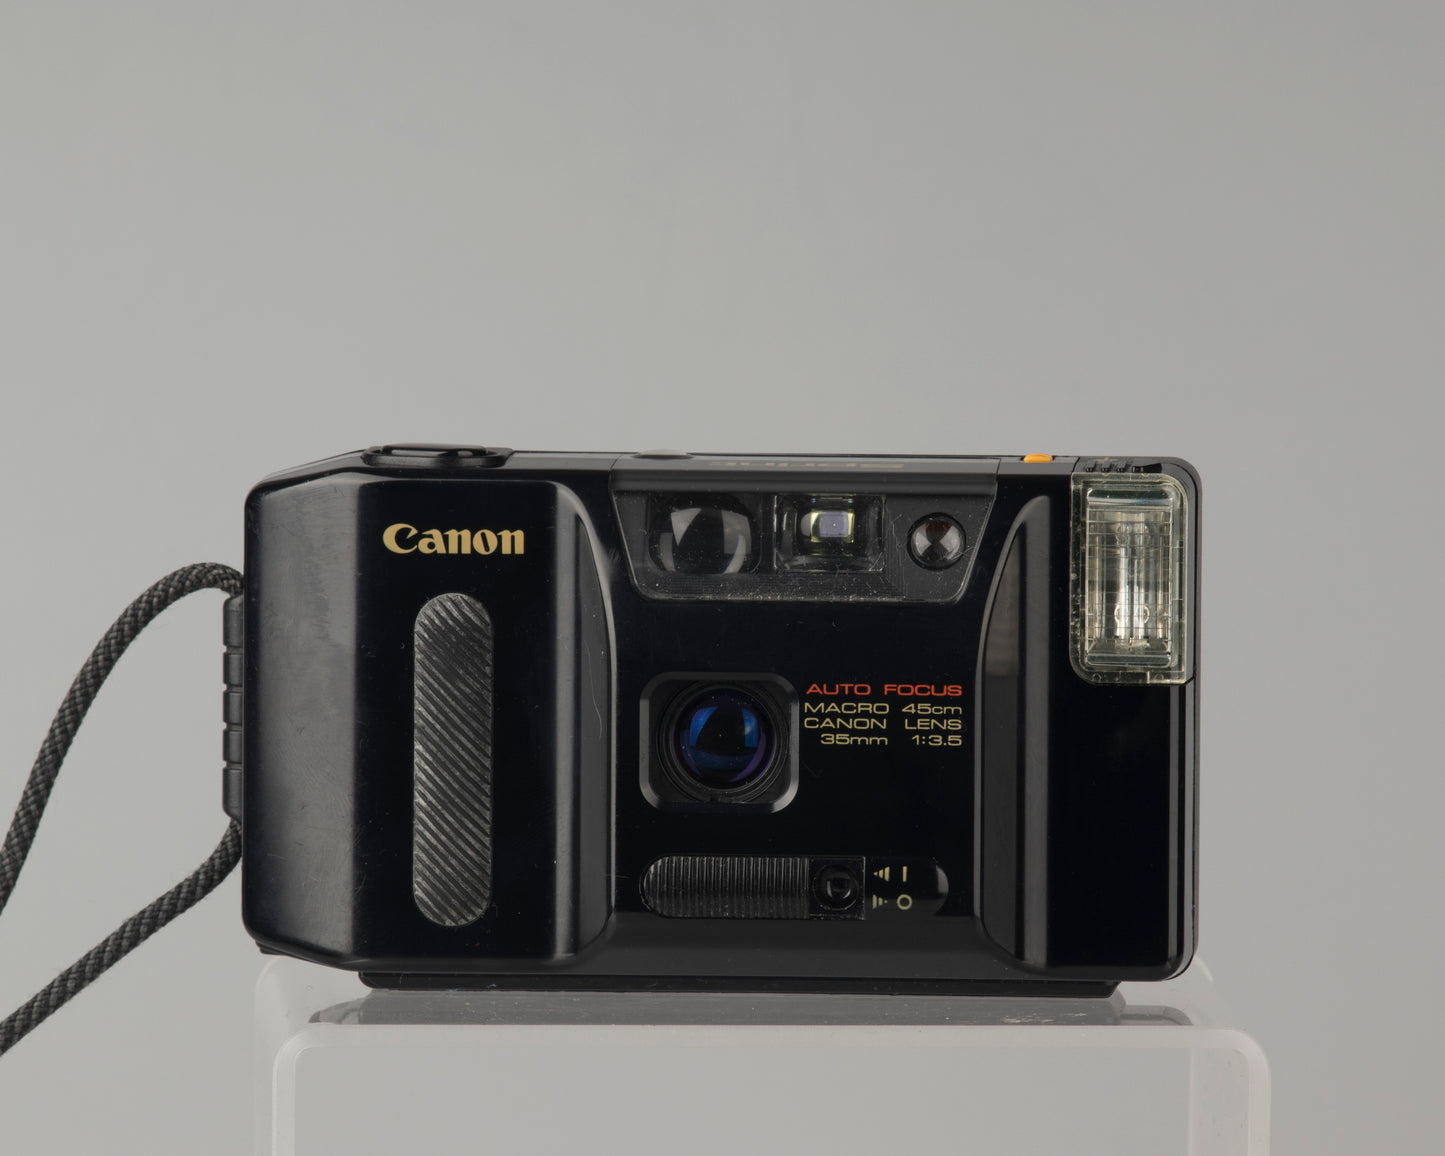 Canon Sprint 35mm camera with case